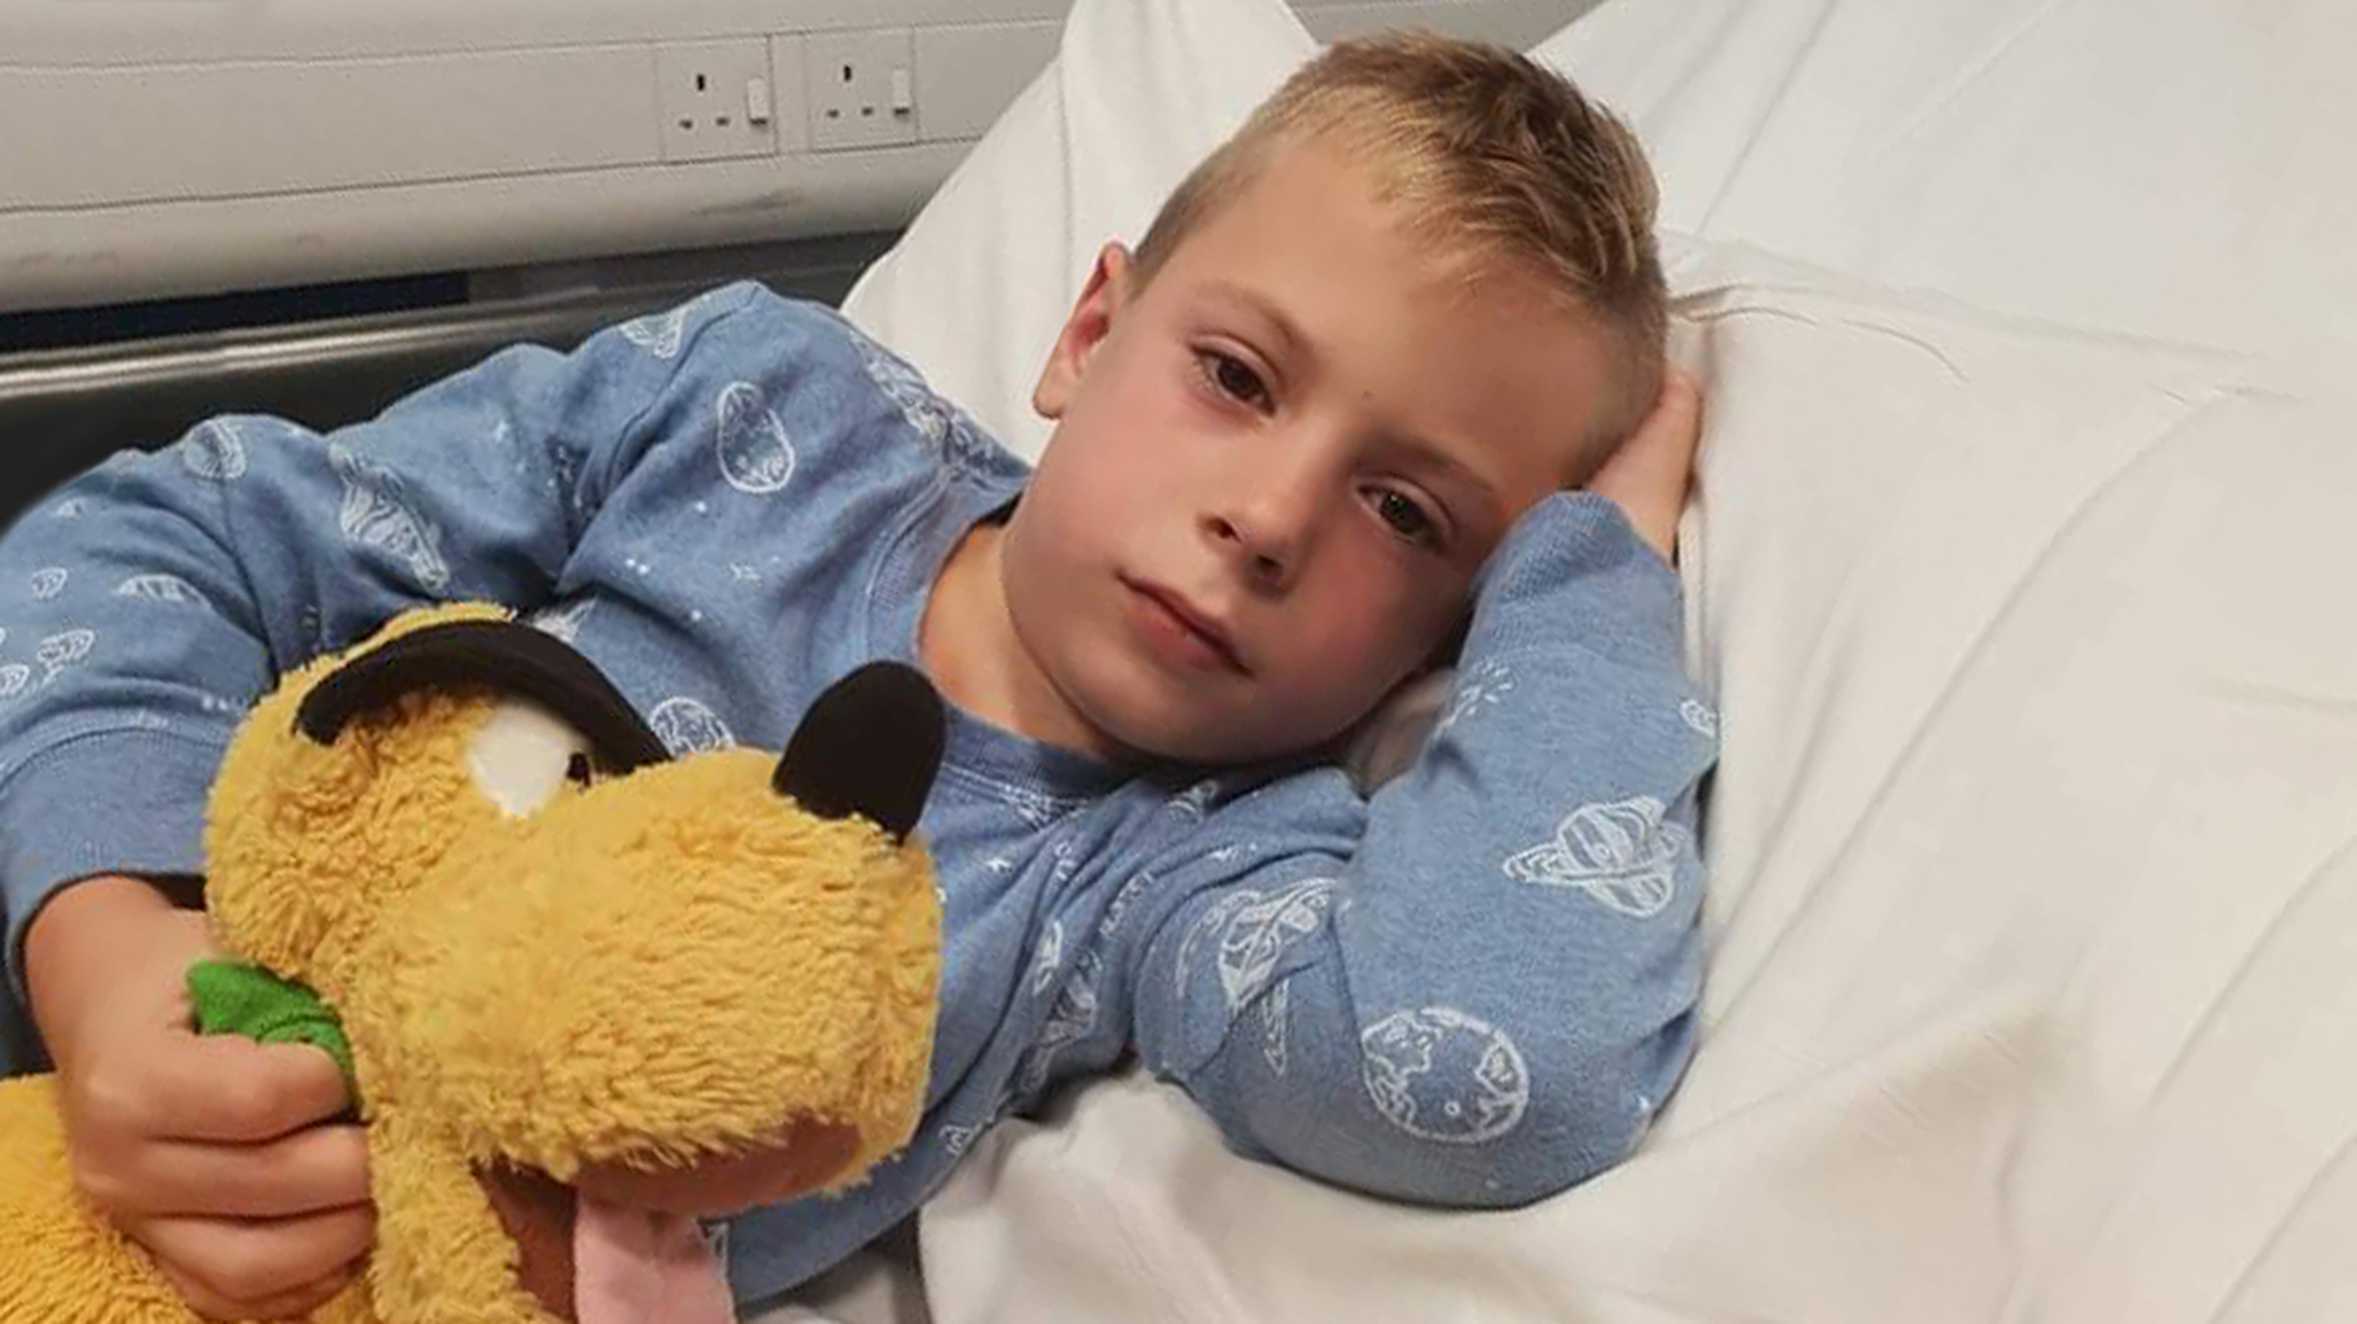 Alfie in his hospital bed, holding one of his Pluto toys.